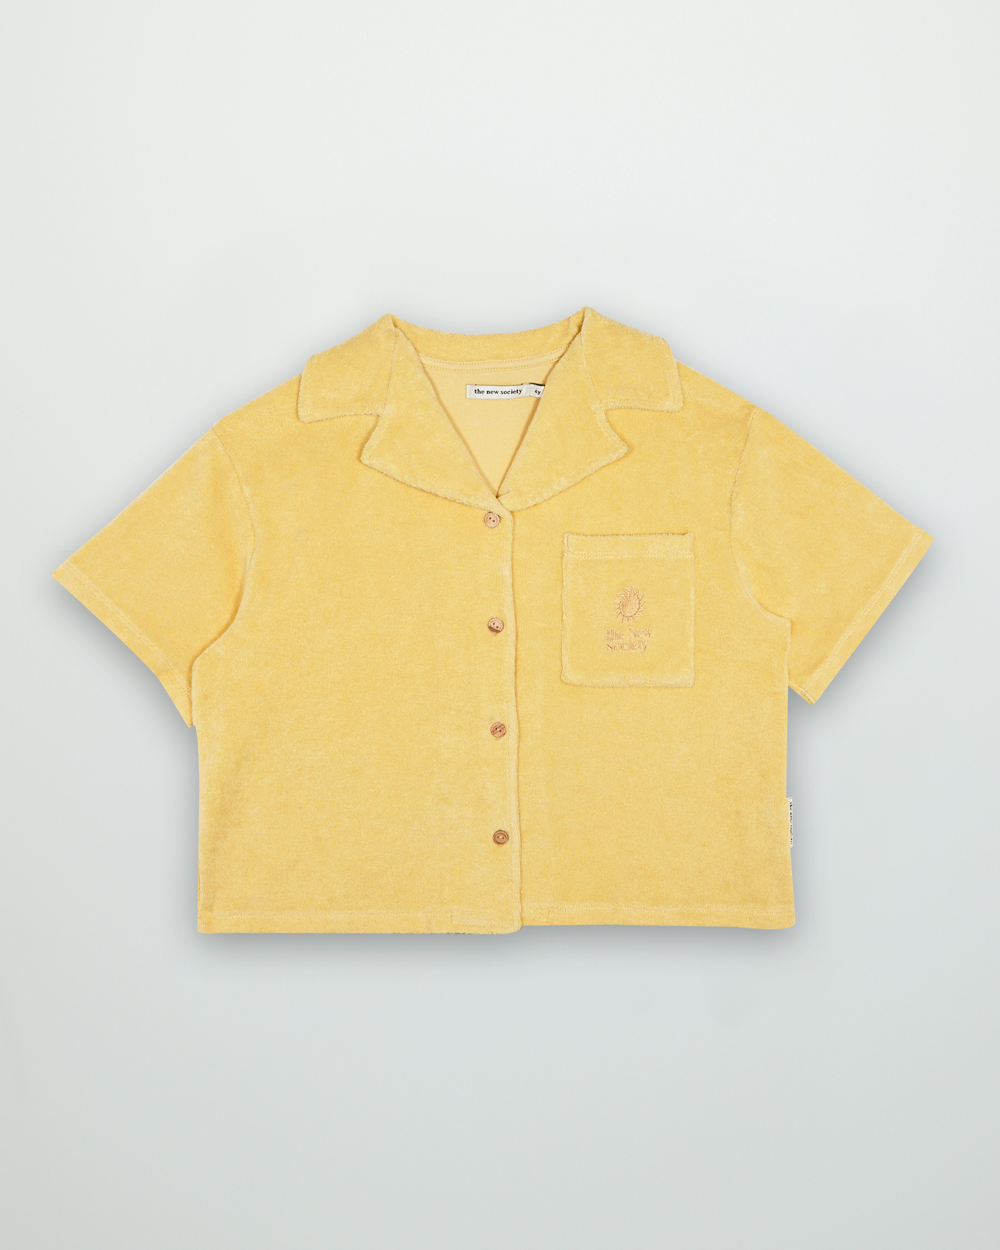 [THE NEW SOCIETY ] Nicclo Shirt Cannuccia